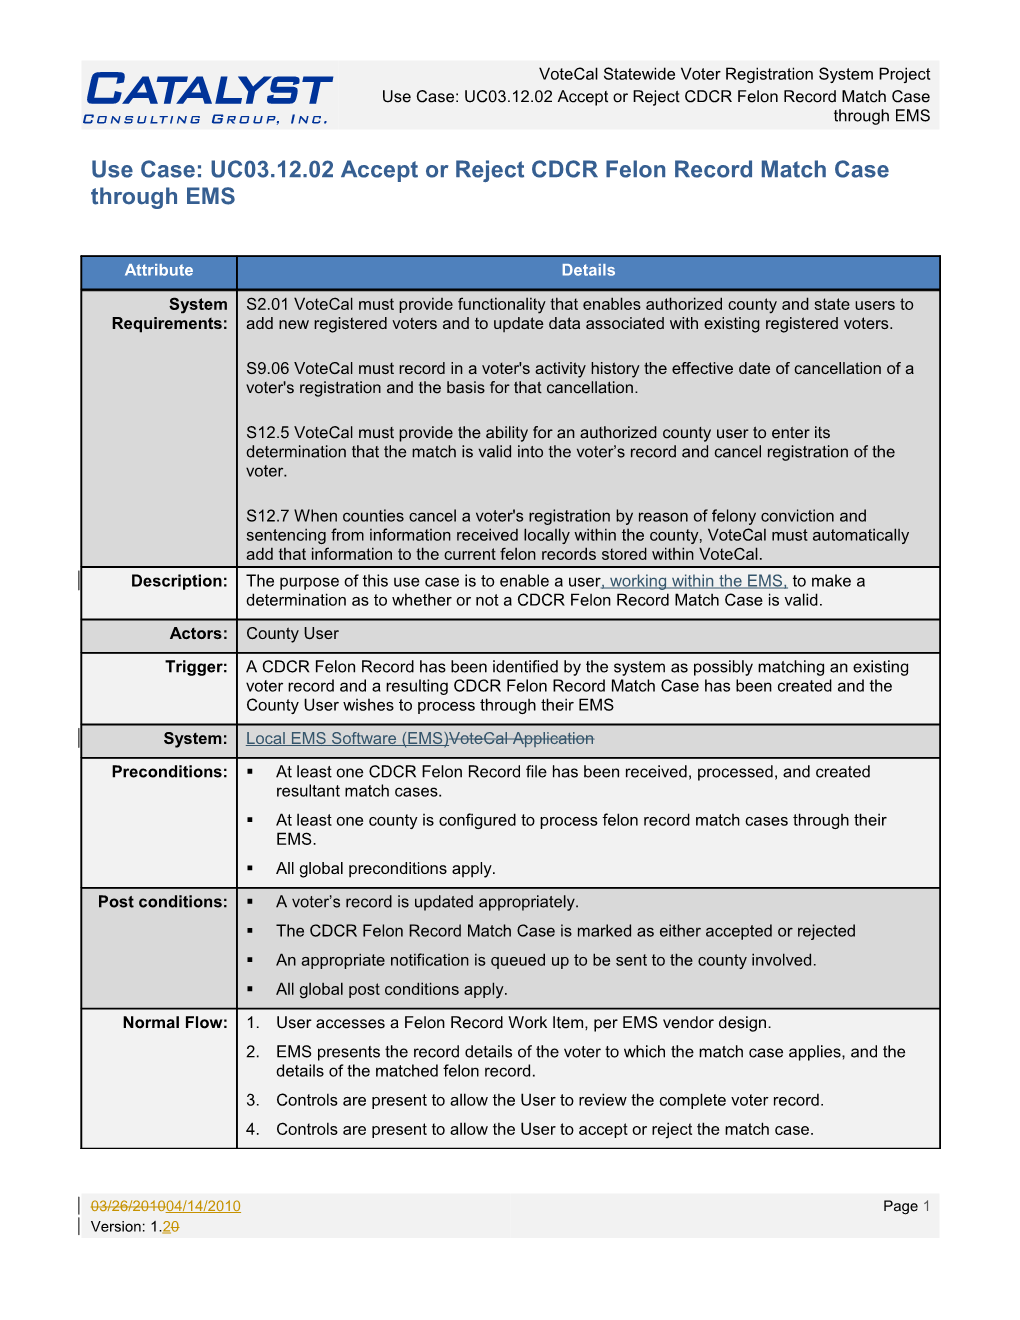 Use Case: UC03.12.02 Accept Or Reject CDCR Felon Record Match Case Through EMS IV&V1